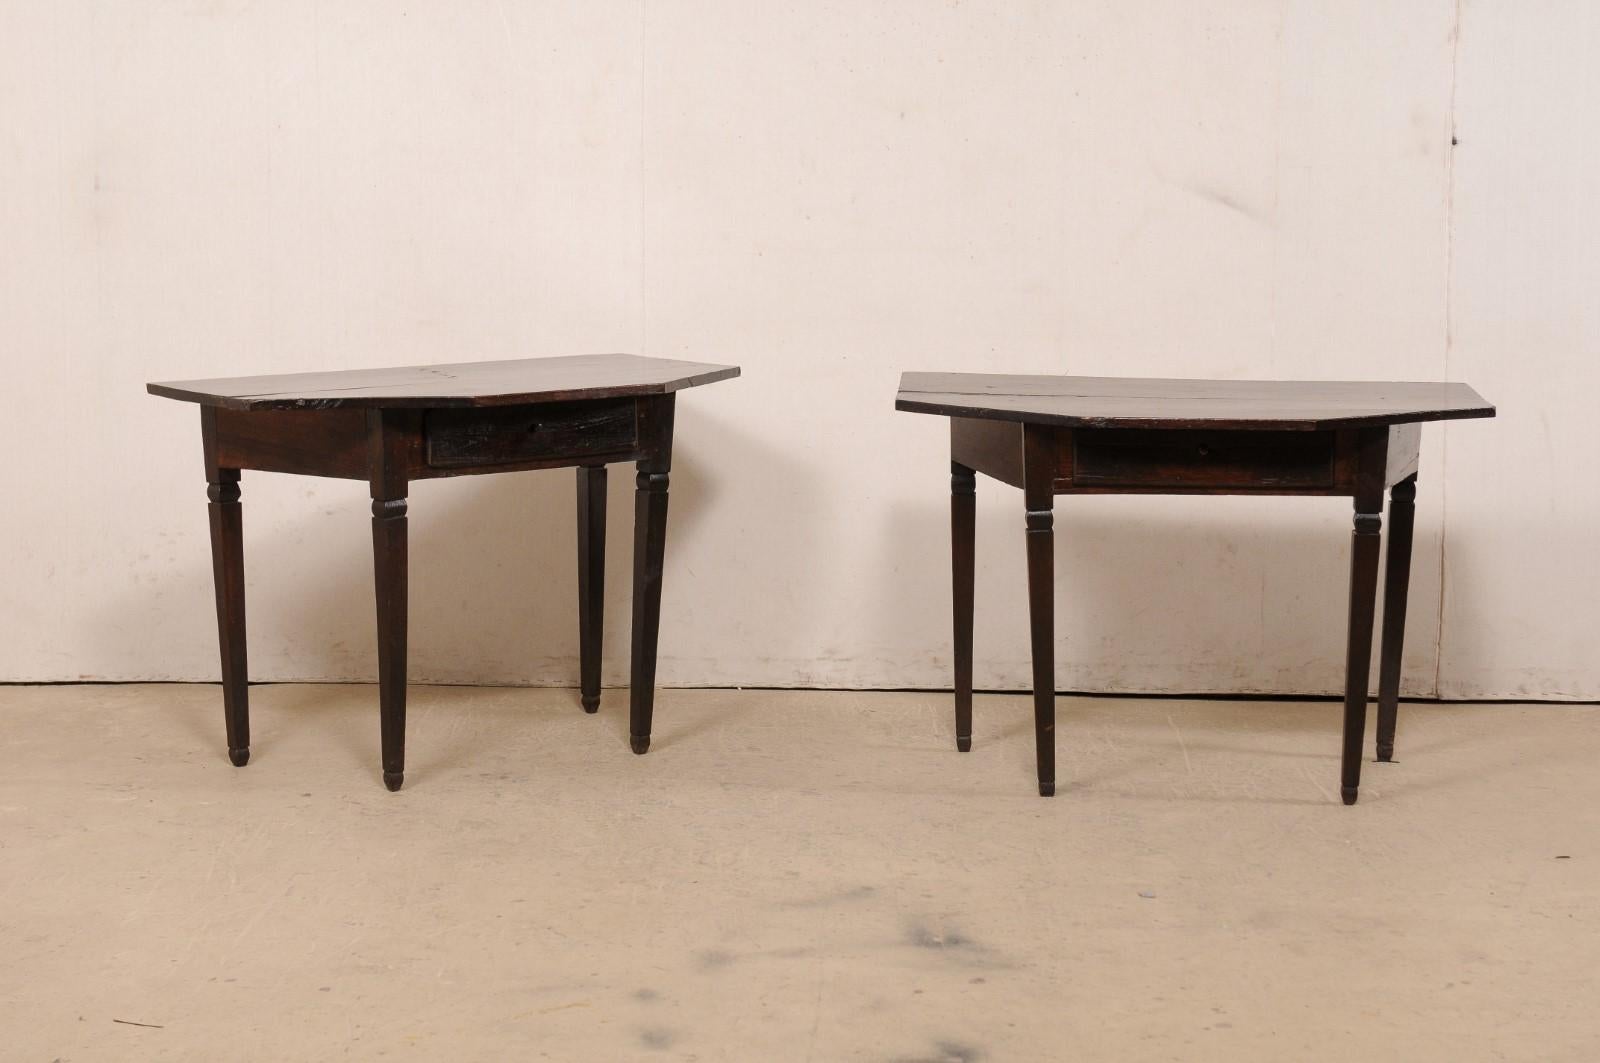 An Italian pair of carved-wood demi-lune tables from the 19th century. This antique pair of tables from Italy each feature a halved-octagon shaped top, atop an inset apron which houses a drawer at front side, and is canted at flanking sides. The